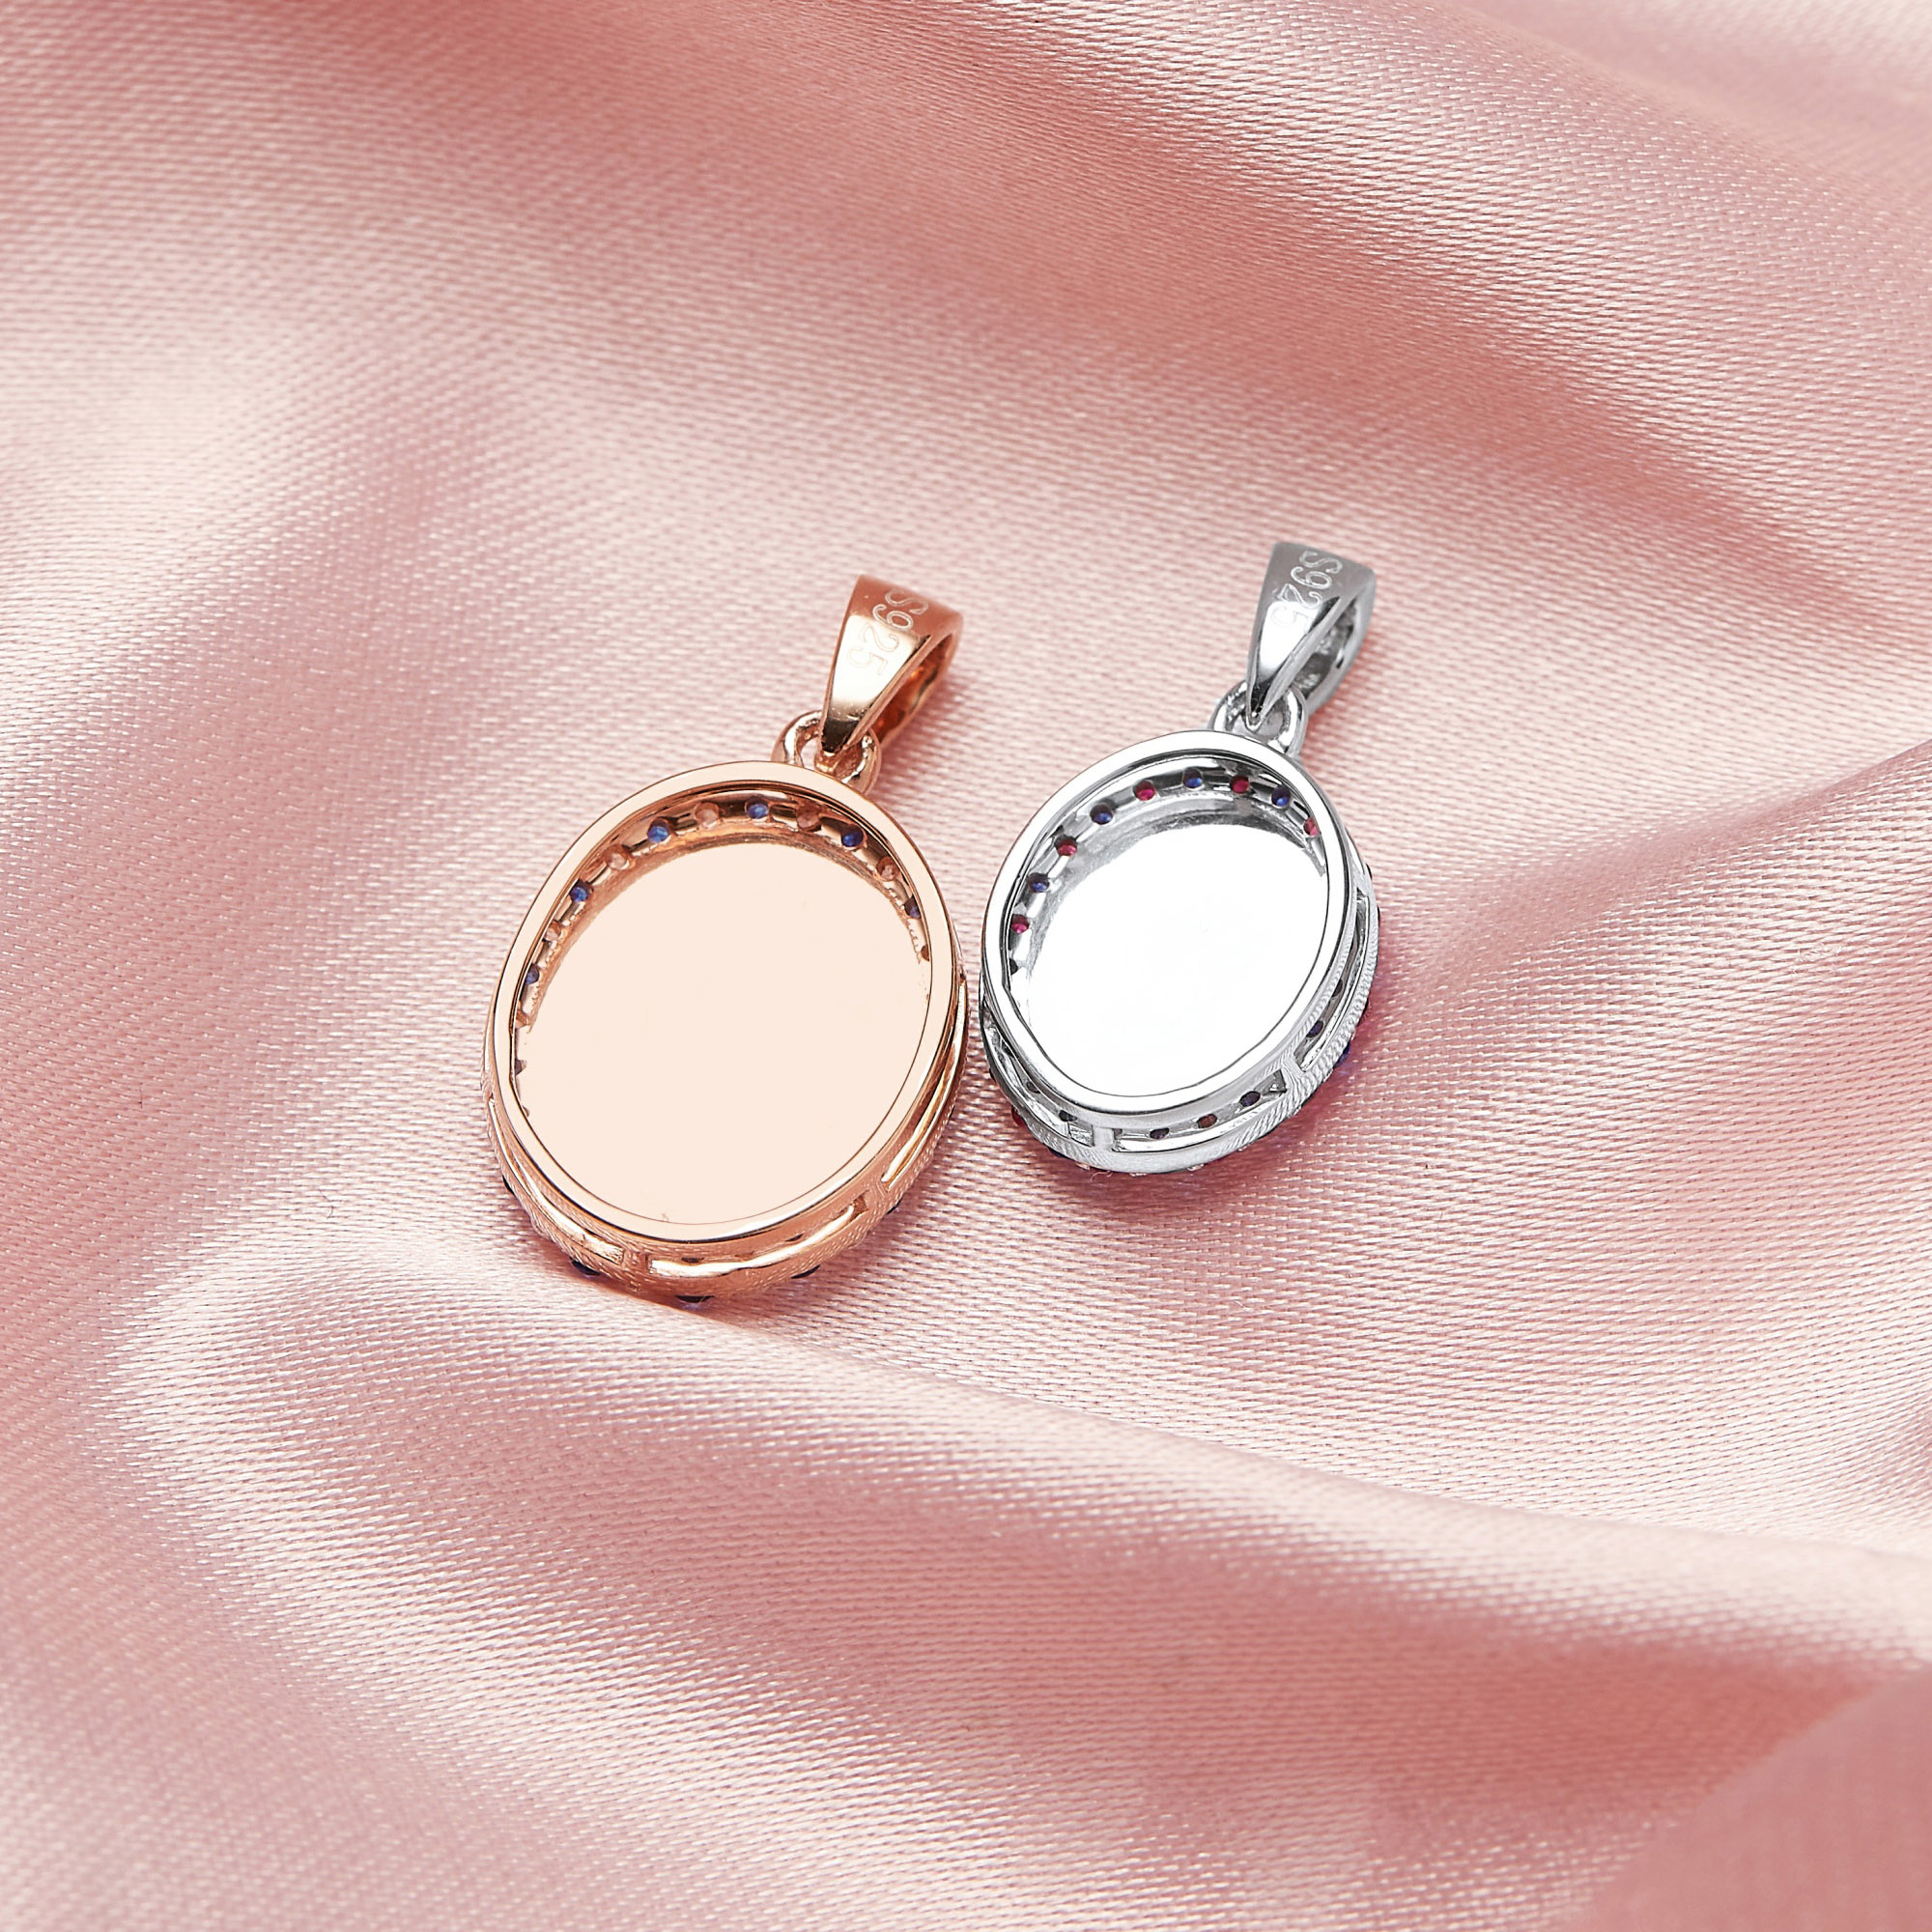 Keepsake Breast Milk Resin Oval Pendant Bezel Settings,Solid Back 925 Sterling Silver Rose Gold Plated Pendant,Pave CZ Stone Charm,DIY Pendant Supplies 1431252 - Click Image to Close